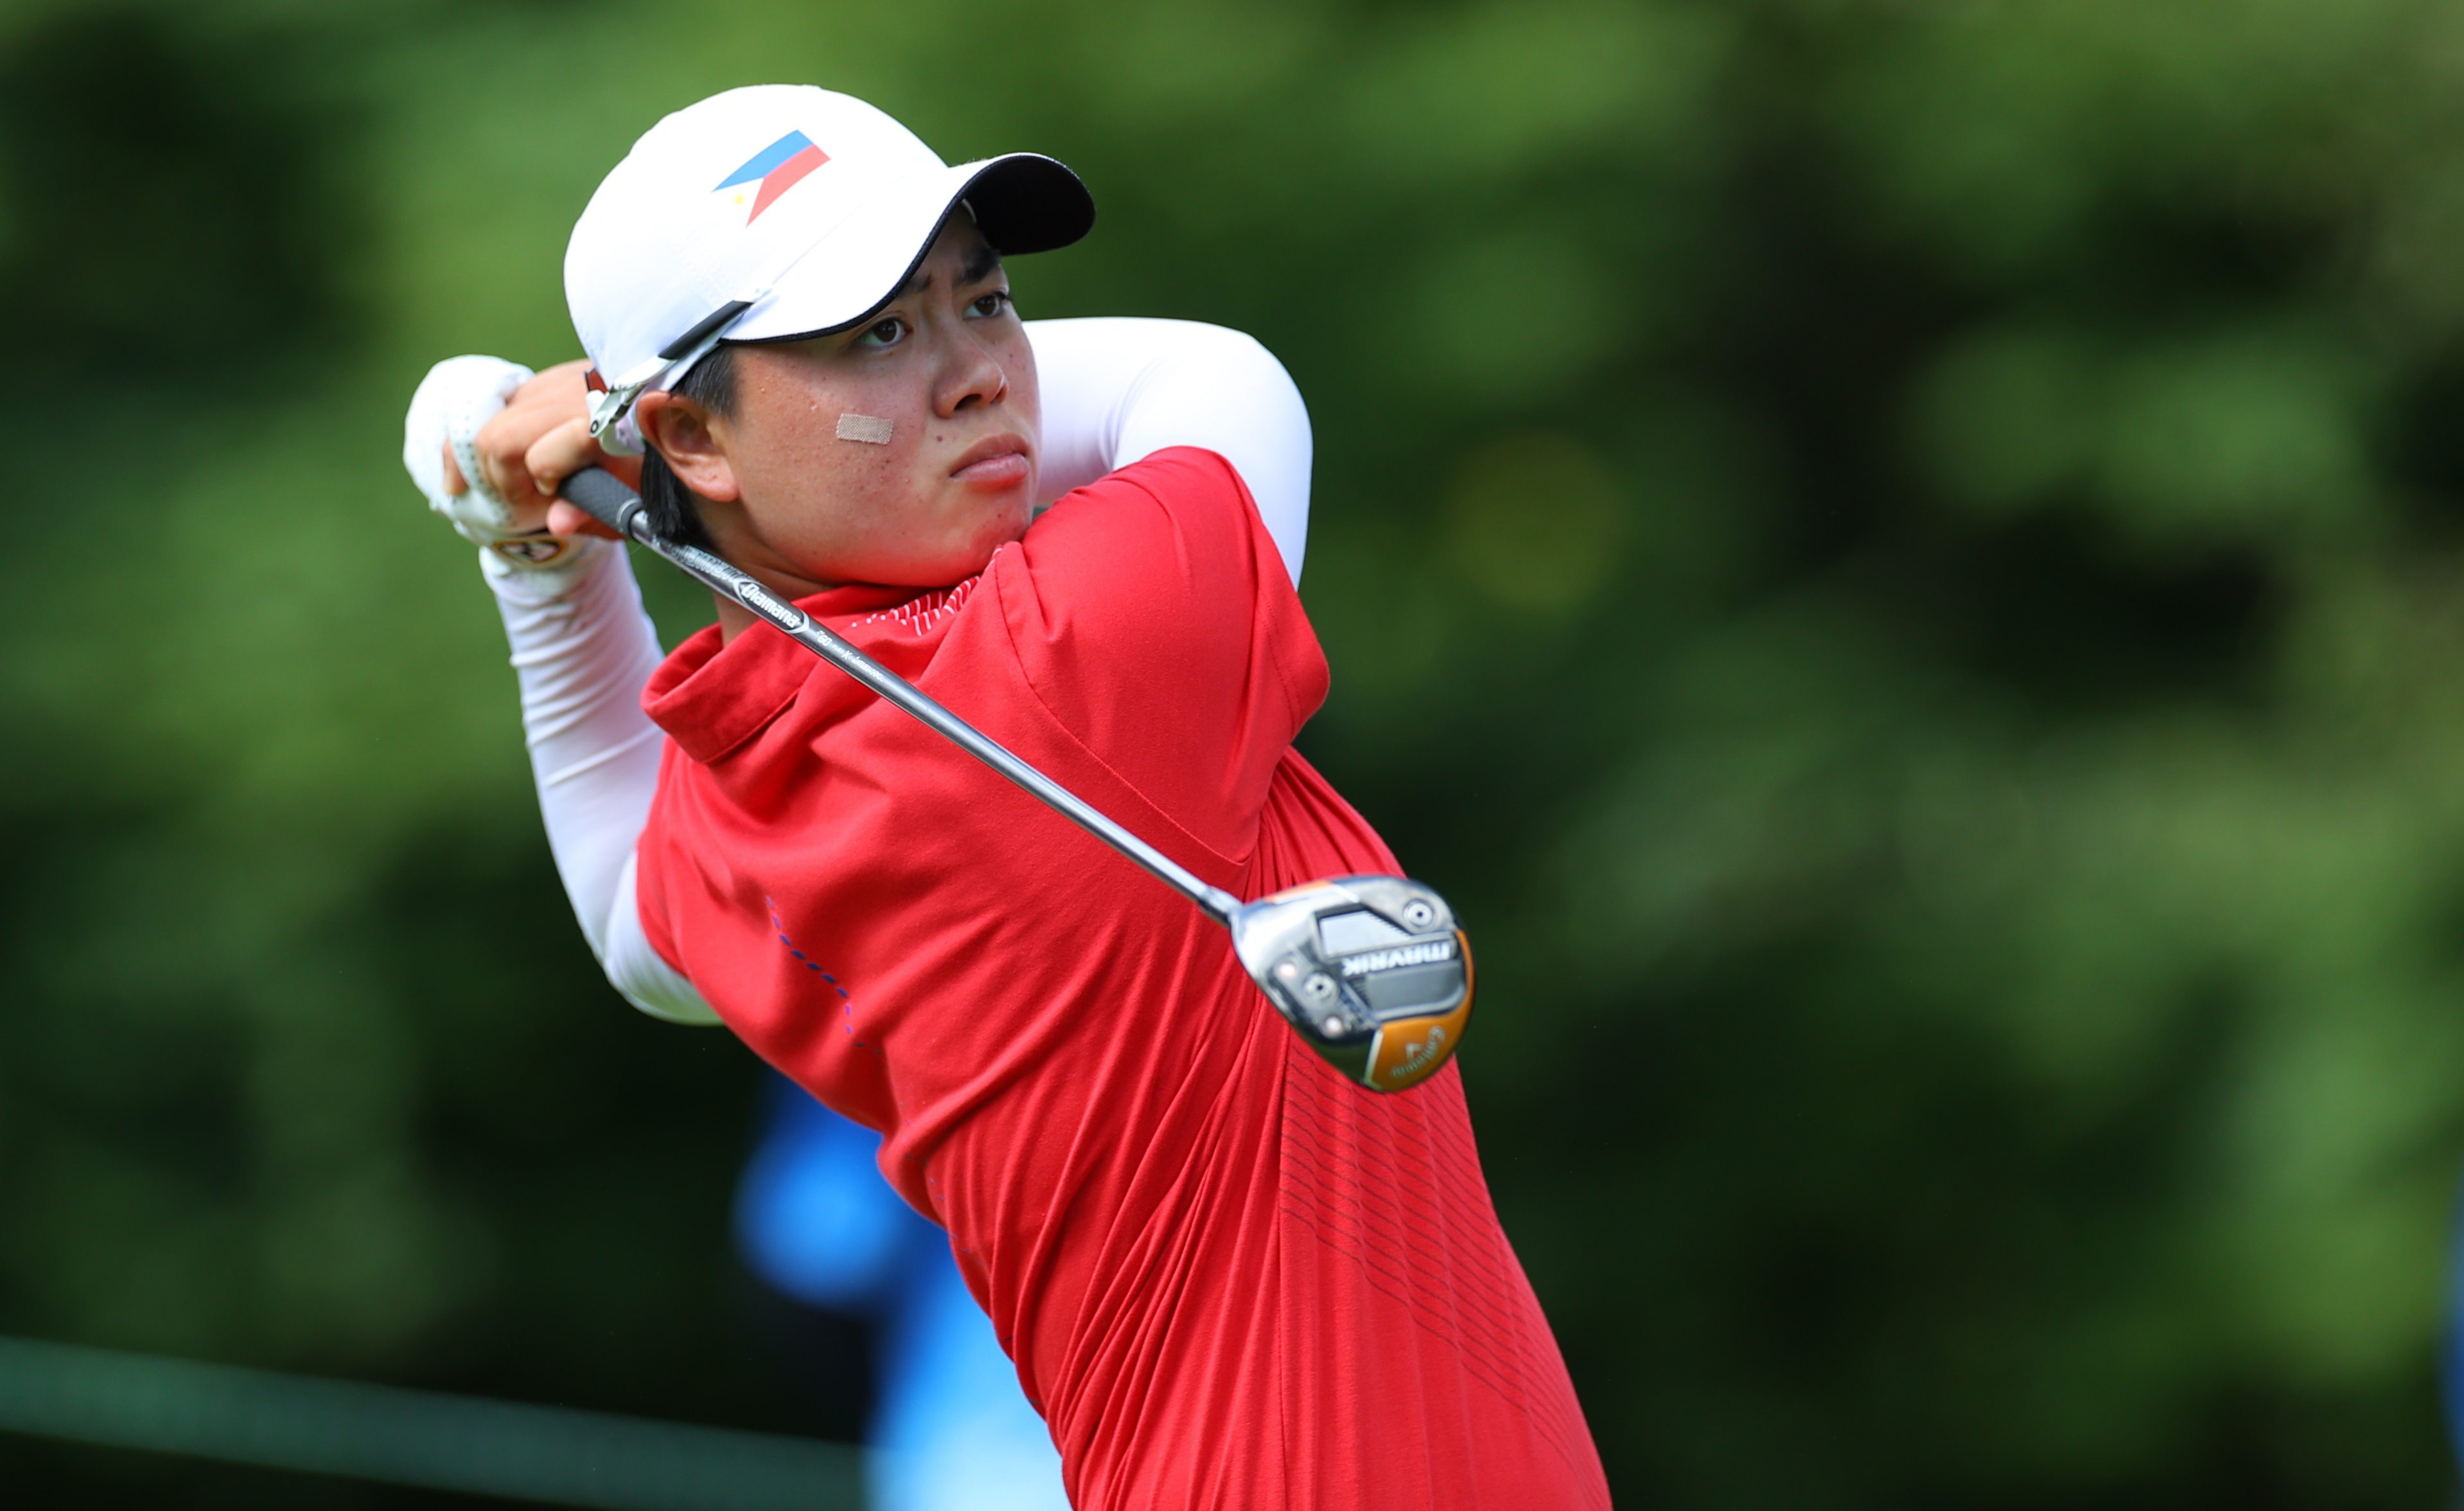 Yuka Saso behind early 3-way tie at 1st in 2021 AIG Women’s Open